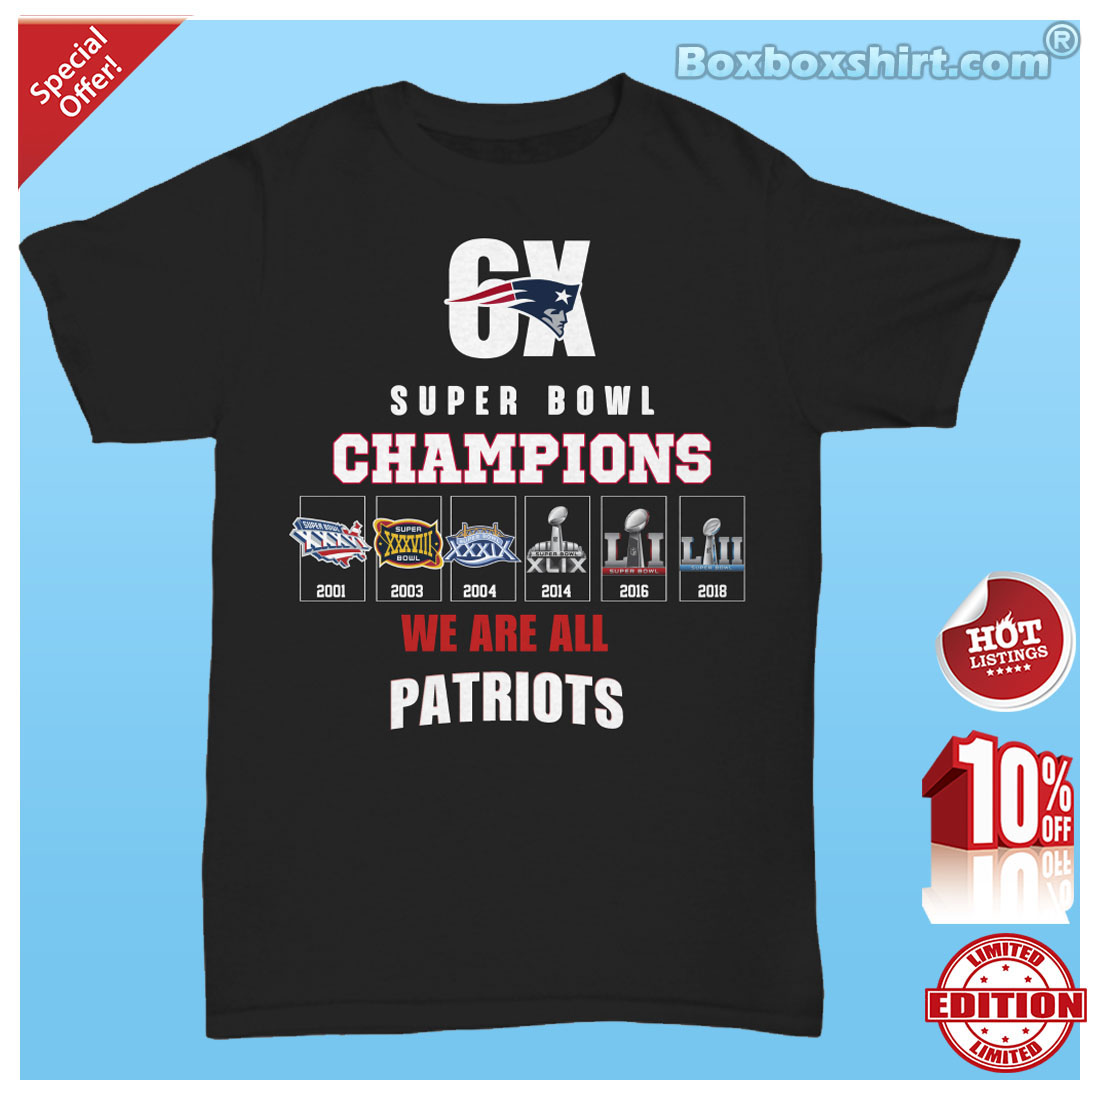 6x super bowl champions we are all Patriots unisex tee